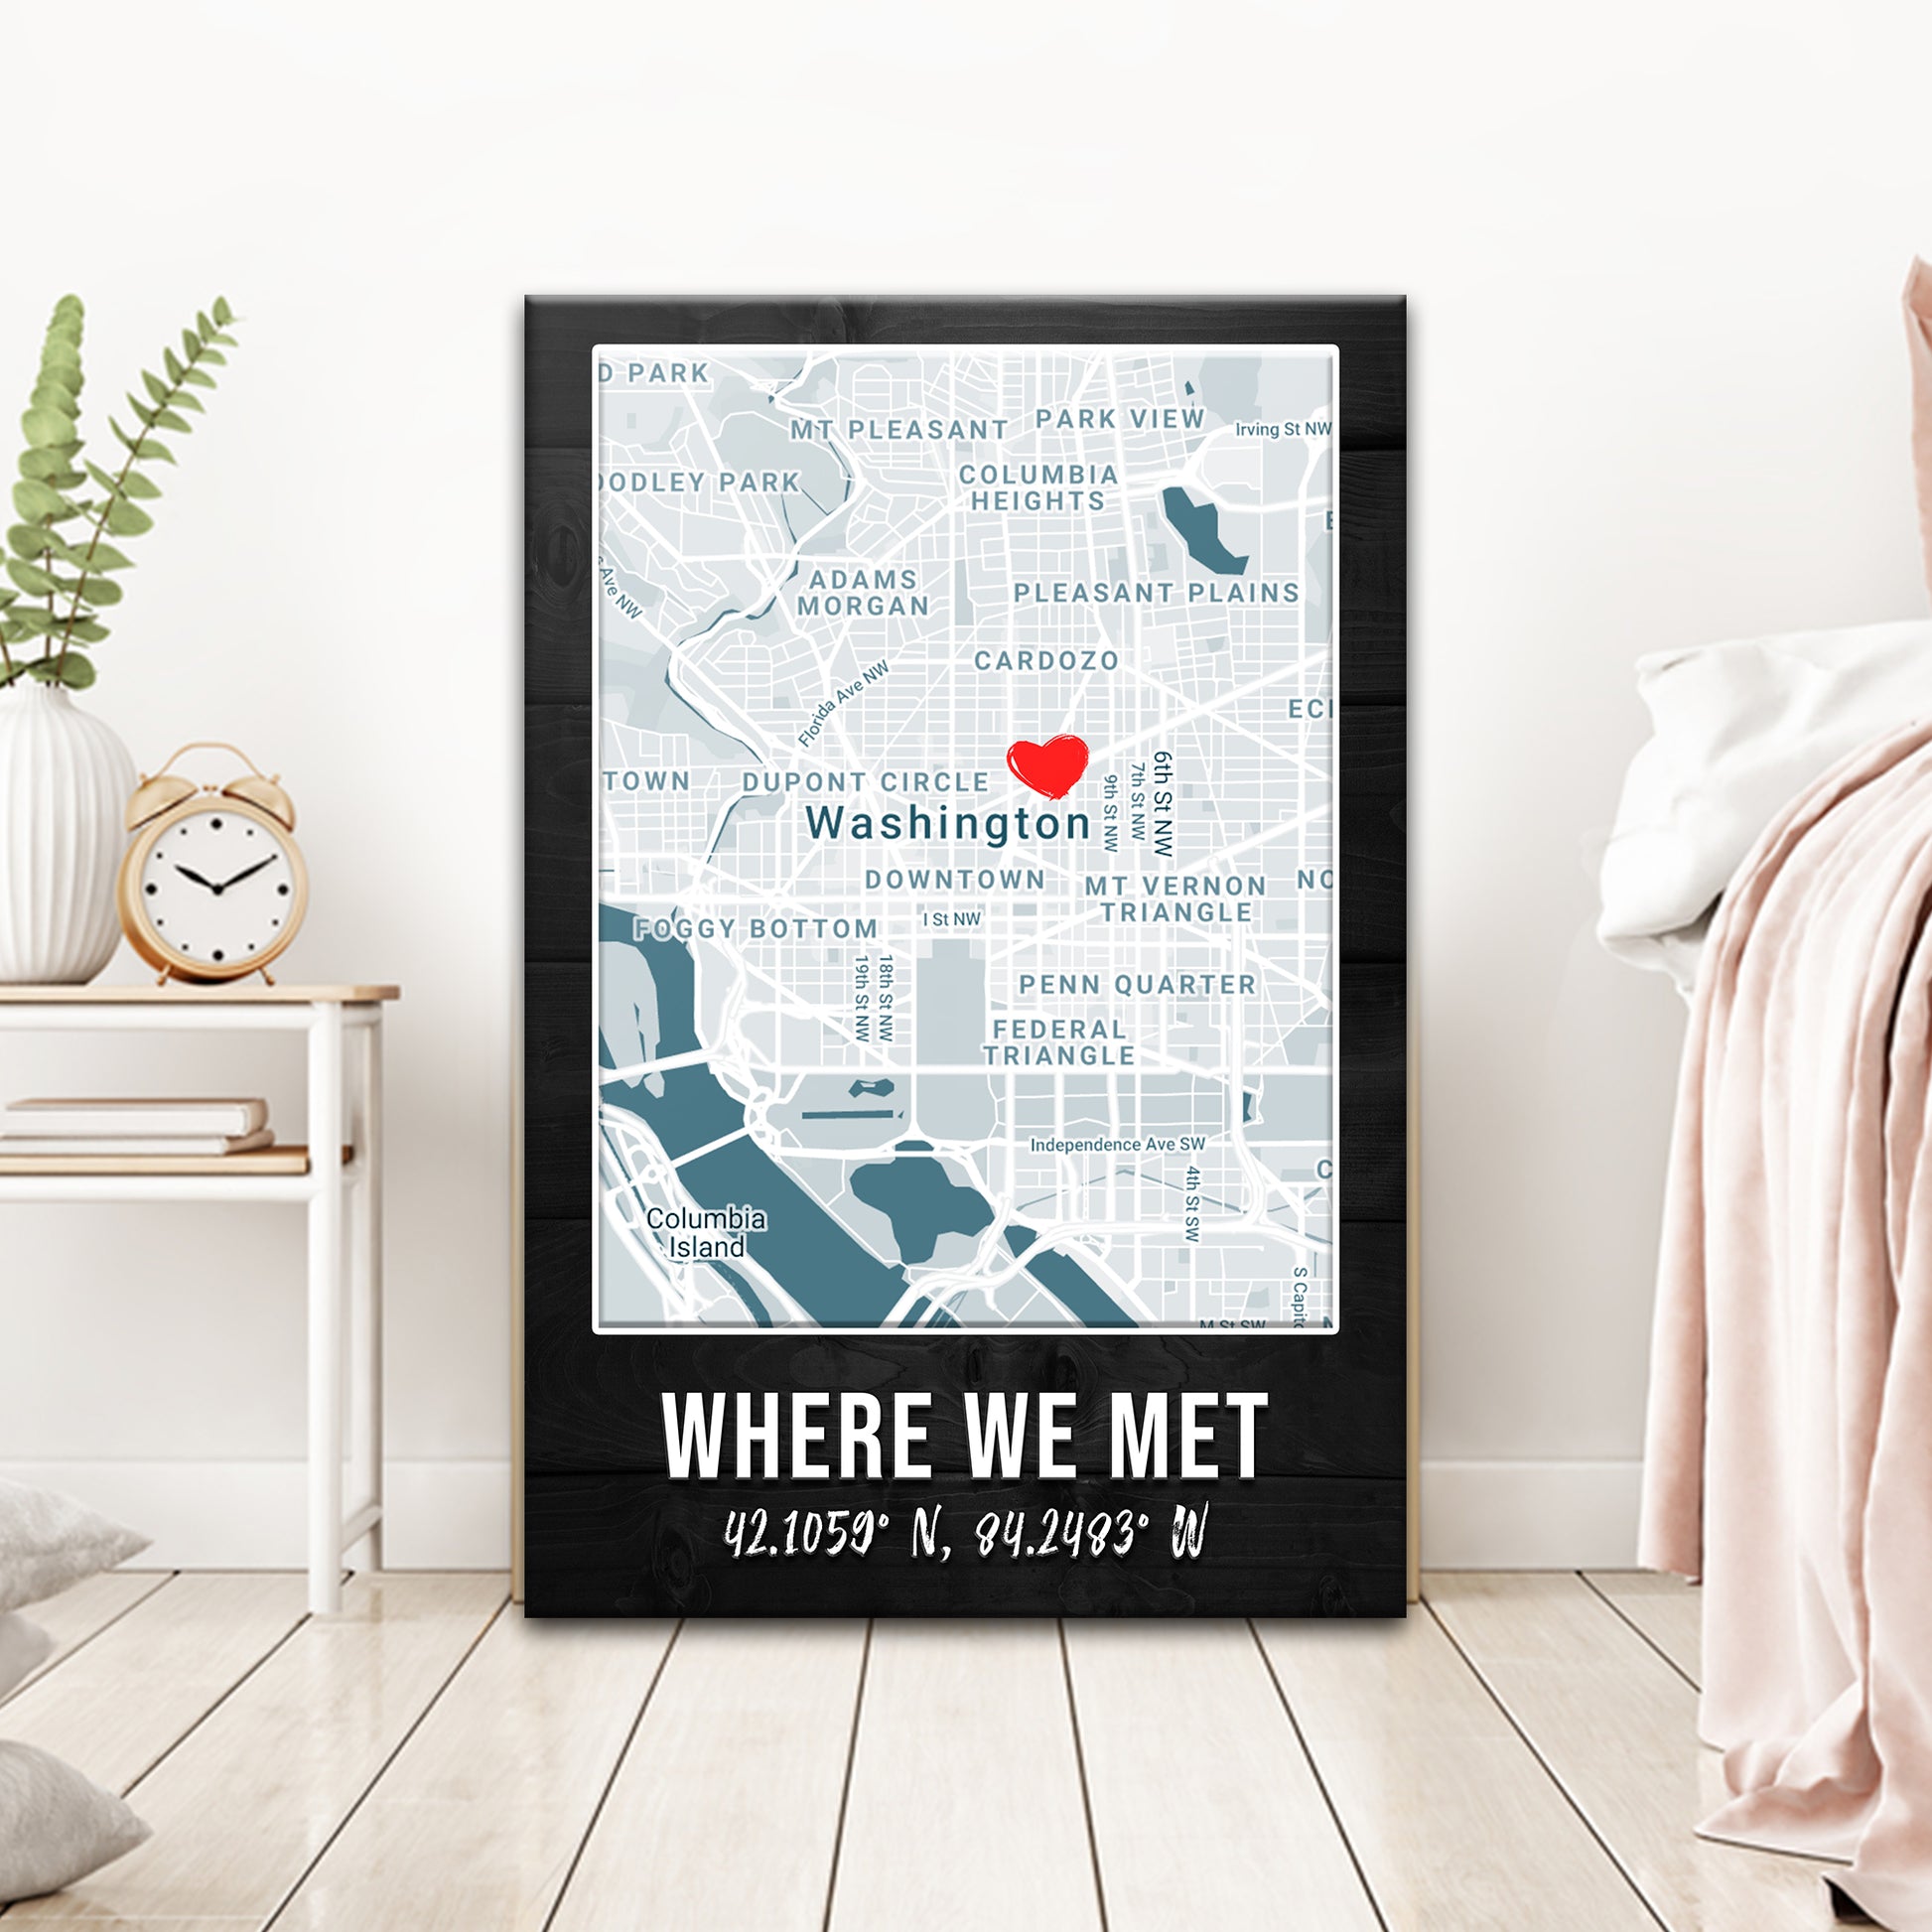 Where We Met Map Sign | Customizable Canvas - Image by Tailored Canvases